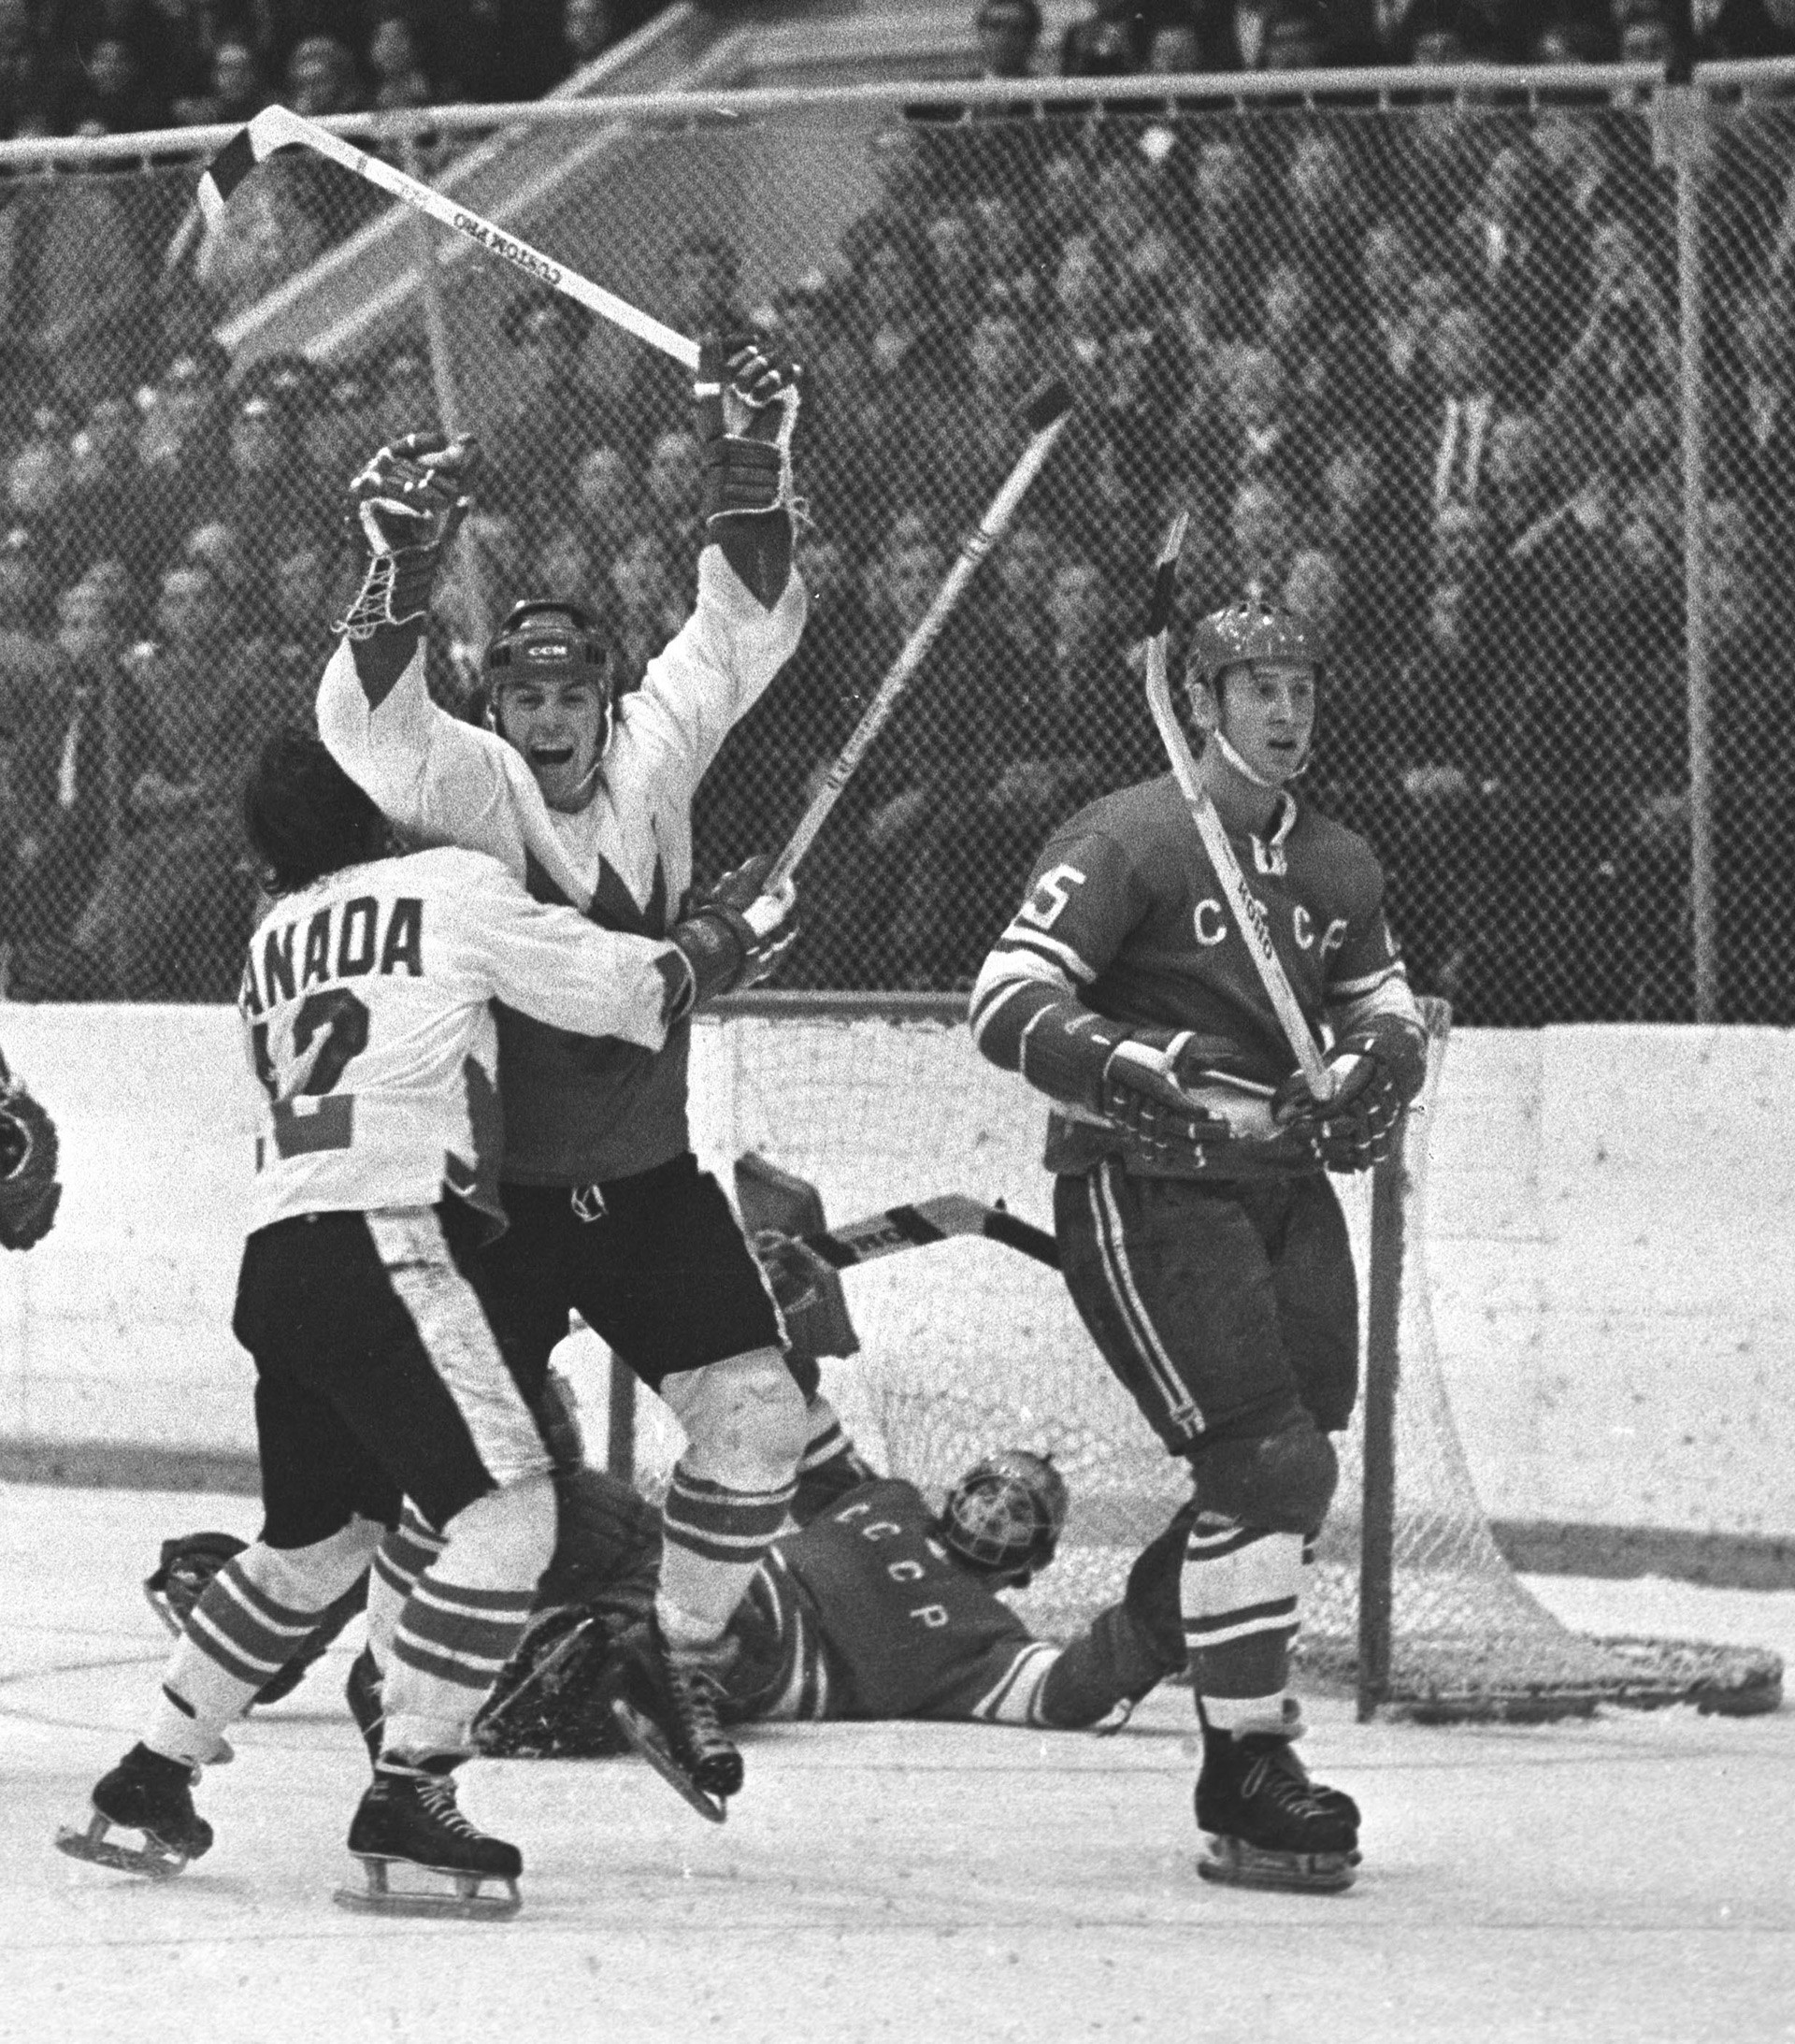 The fearsome Red Machine: The meteoric rise and dramatic decline of Soviet  hockey - Russia Beyond